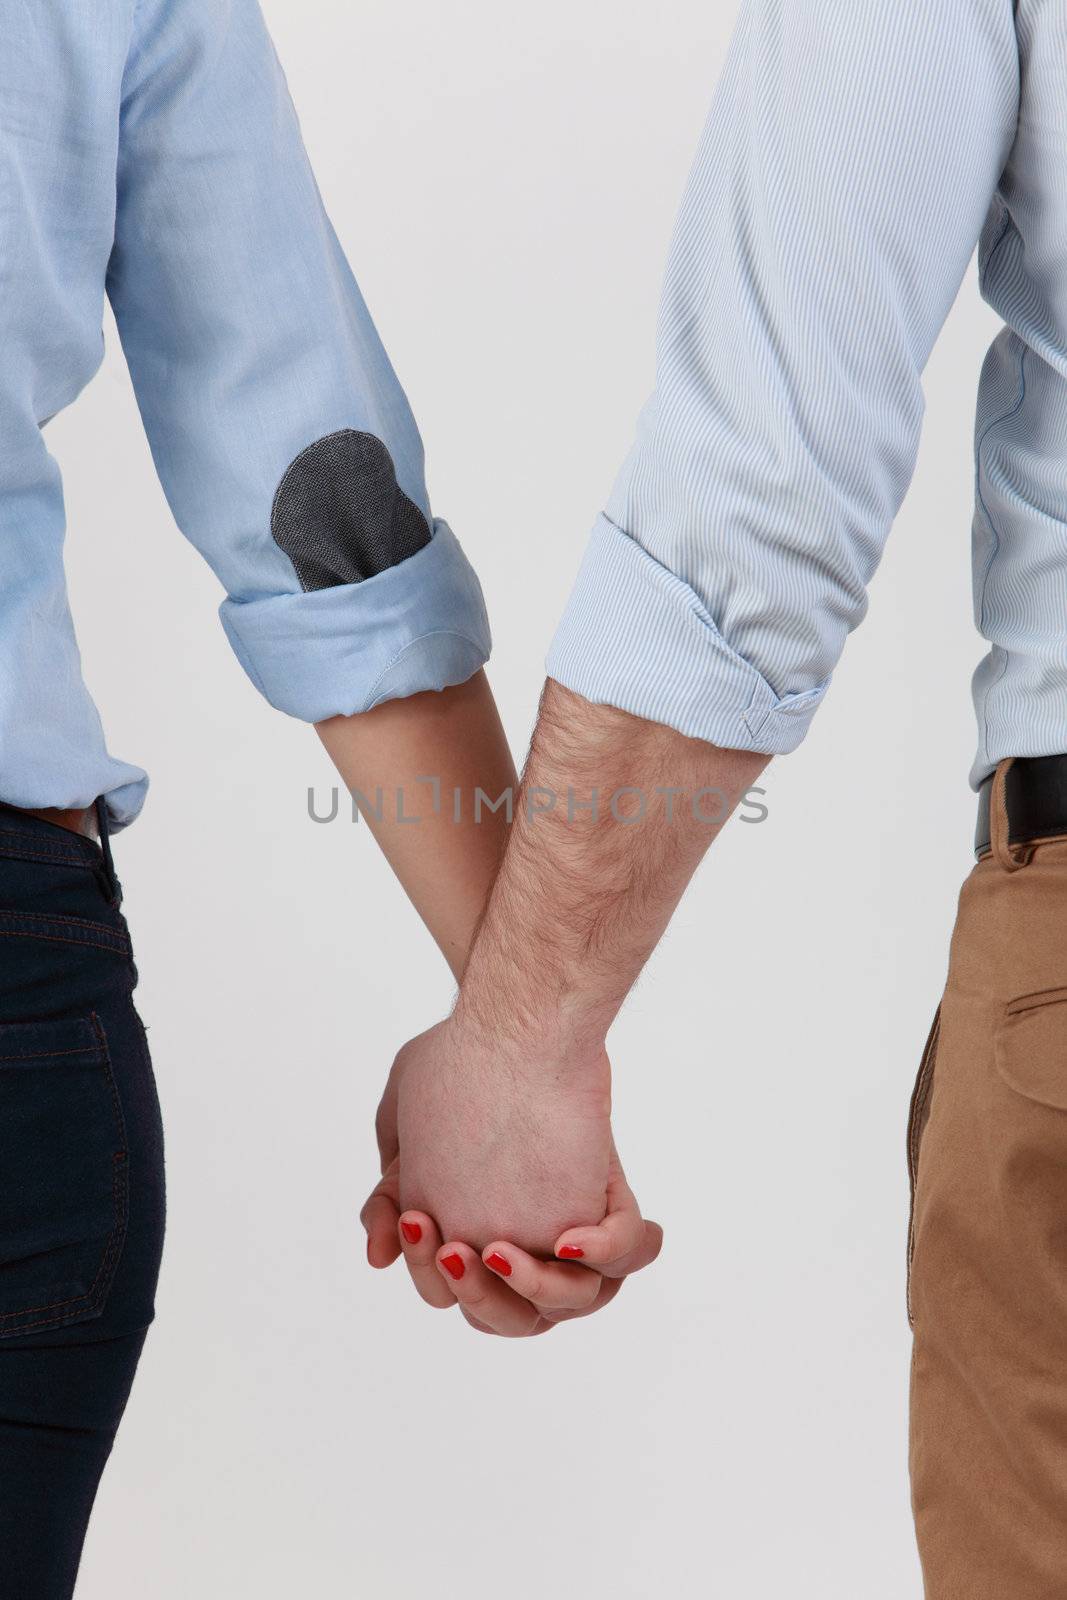 Mid section image of a couple holding hands against a white background.